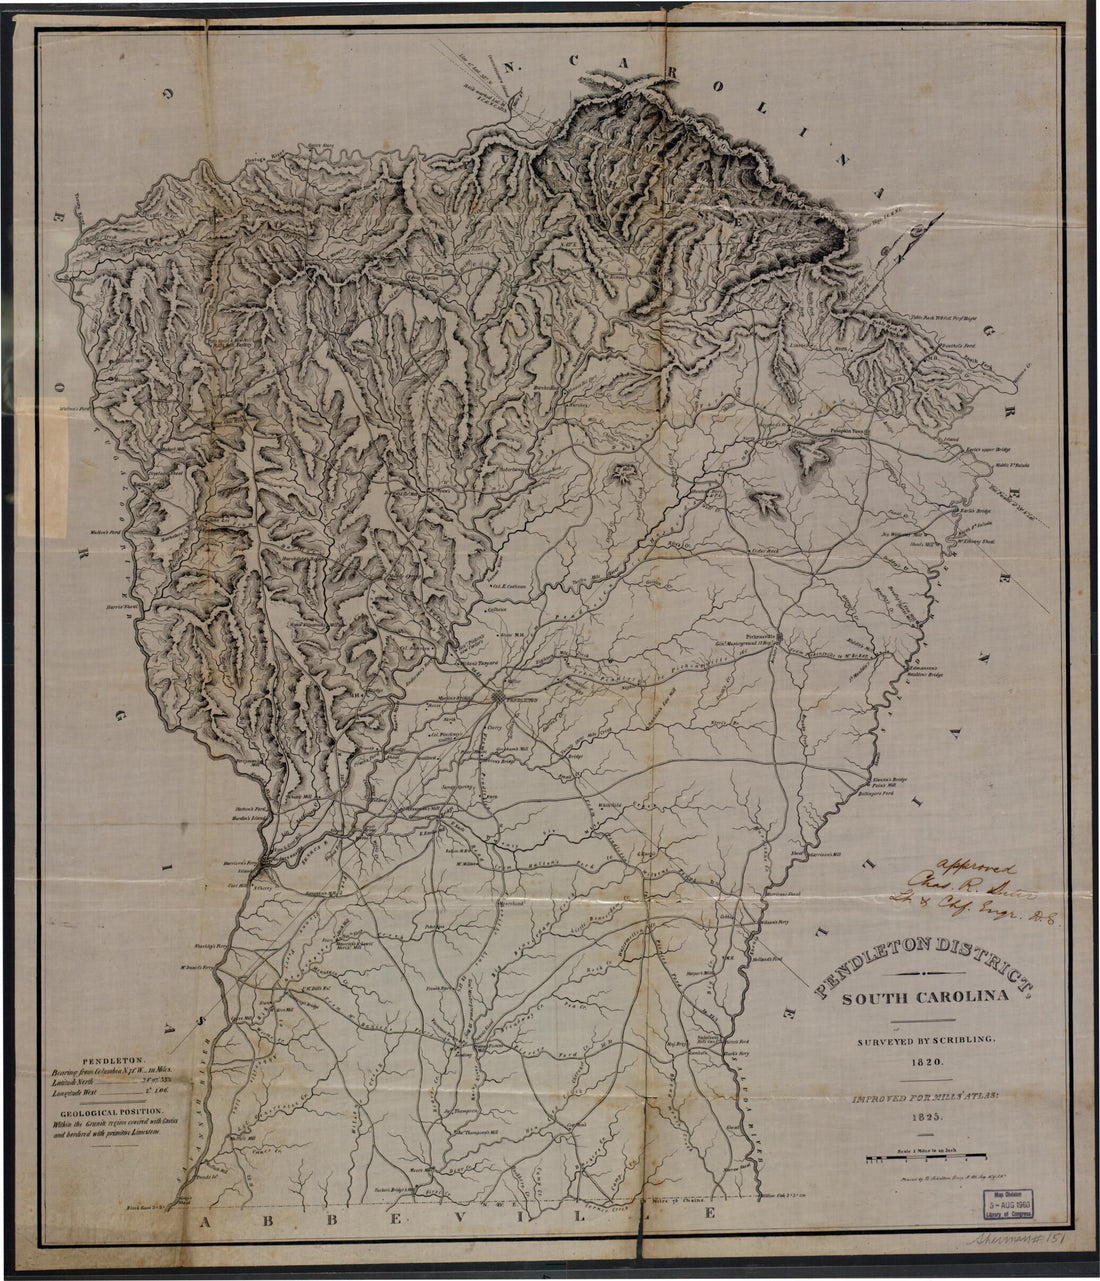 This old map of Pendleton District, South Carolina from 1820 was created by Robert Mills, B. Schelten,  Scribling in 1820